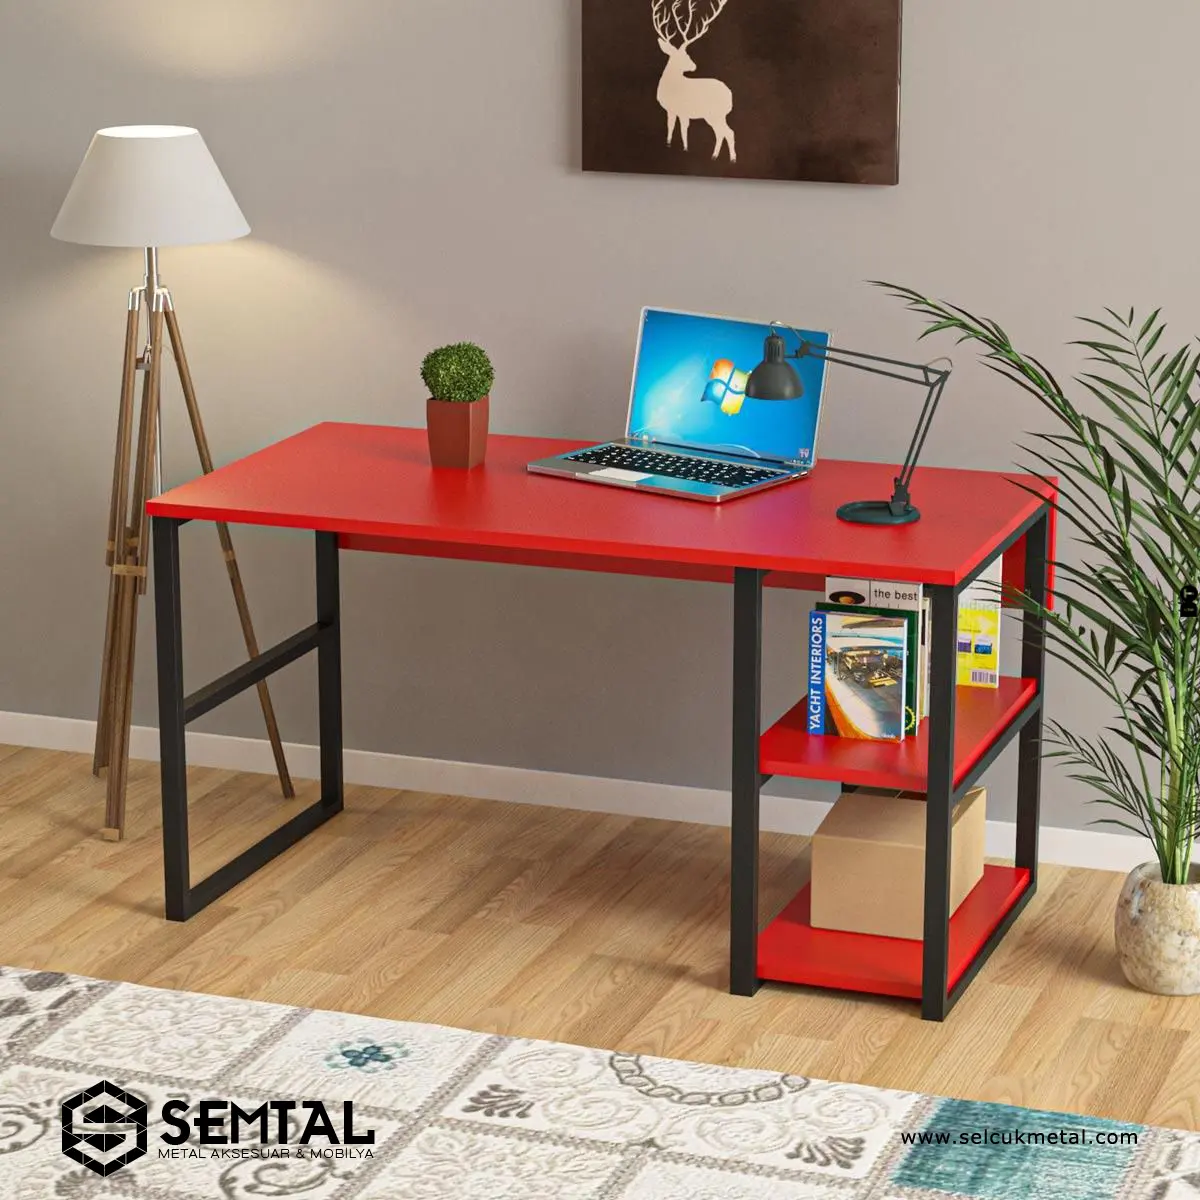 Hot Selling High Quality modern mutli purpose office desk laptop sit study writing work table metal and wooden material